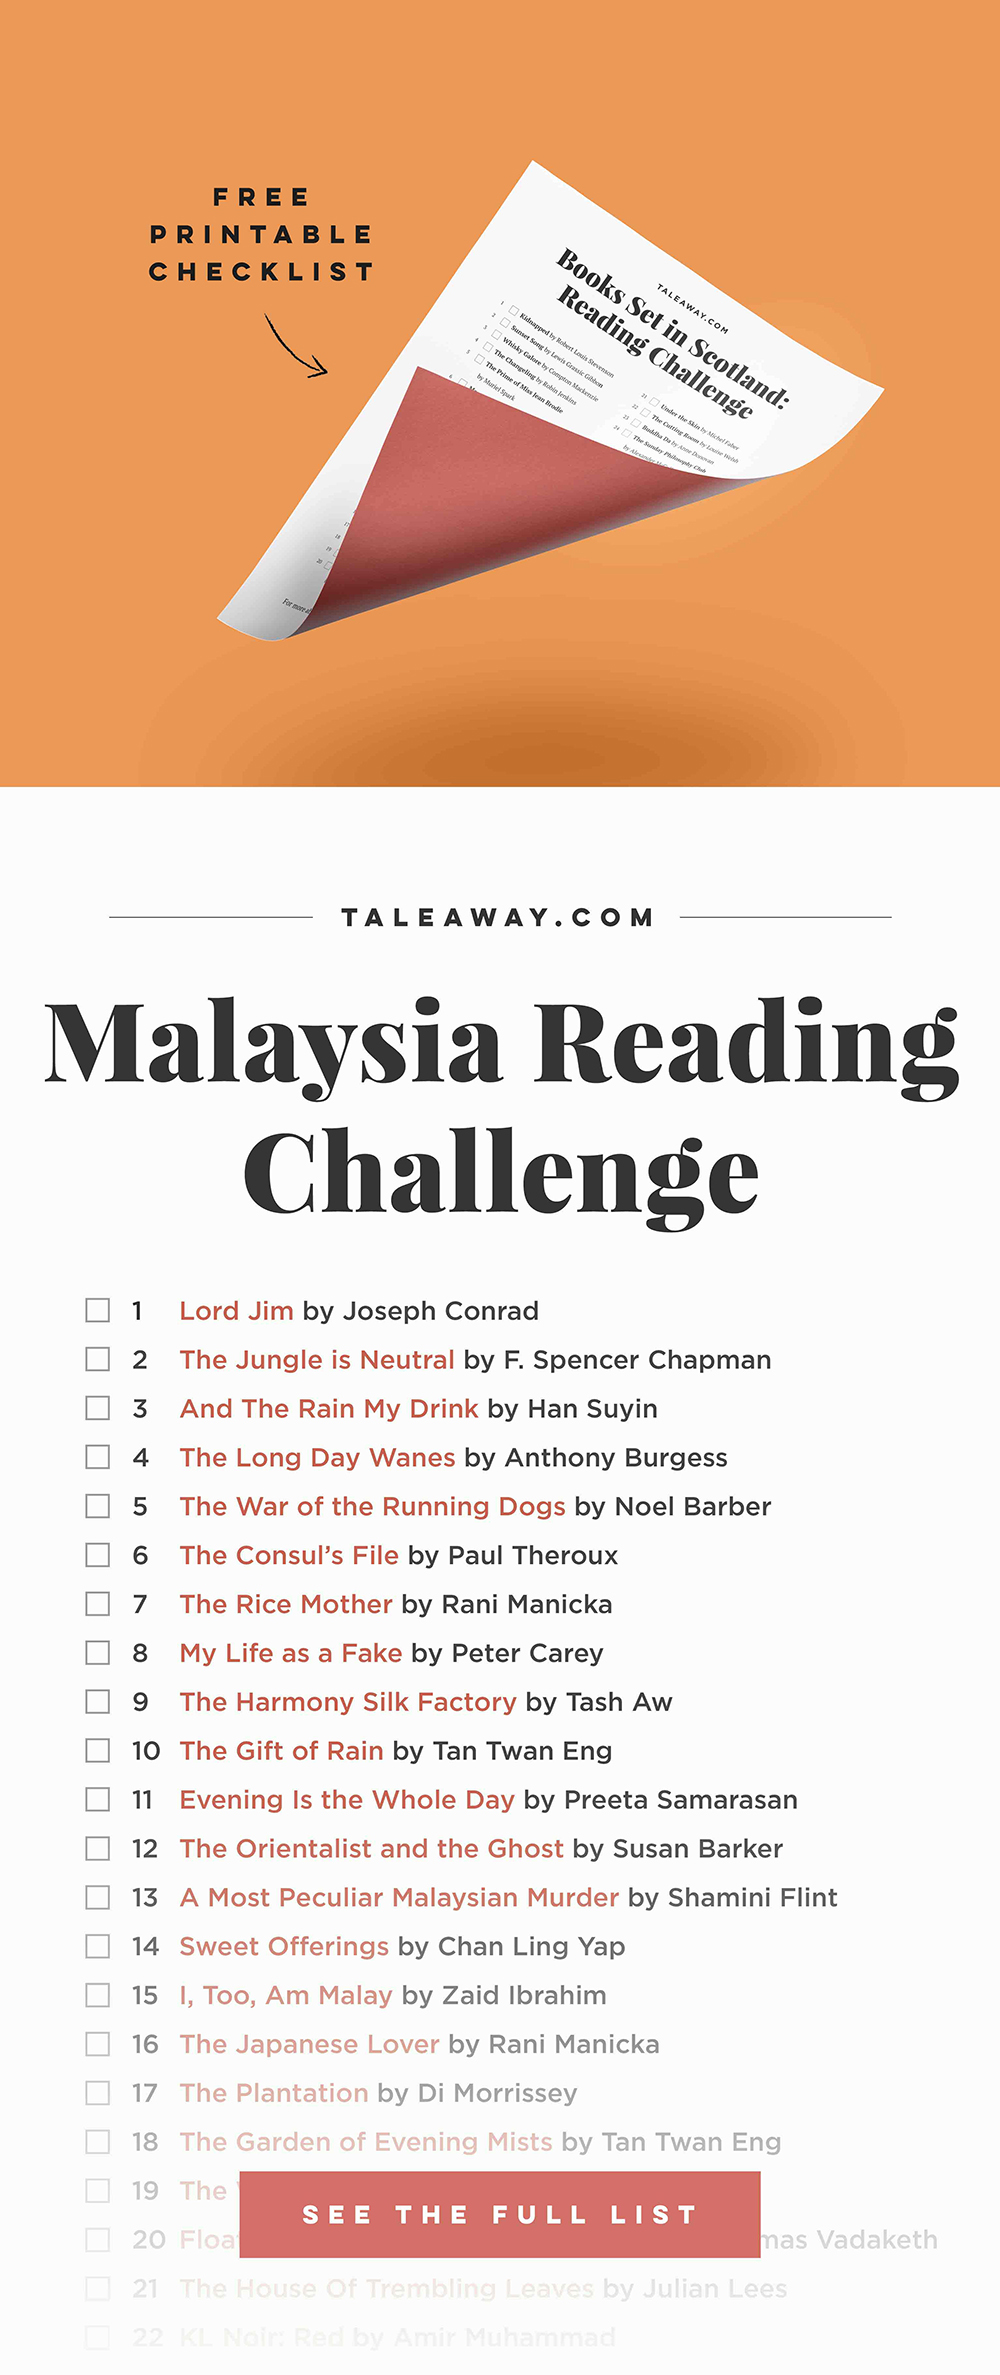 Malaysia Reading Challenge, Books Set In Malaysia - For more books visit www.taleway.com to find books set around the world. reading challenge, malaysian books, malaysia books, book challenge, books you must read, books from around the world, world books, books and travel, travel reading list, reading list, books around the world, books to read, malaysia books novels, malaysia travel